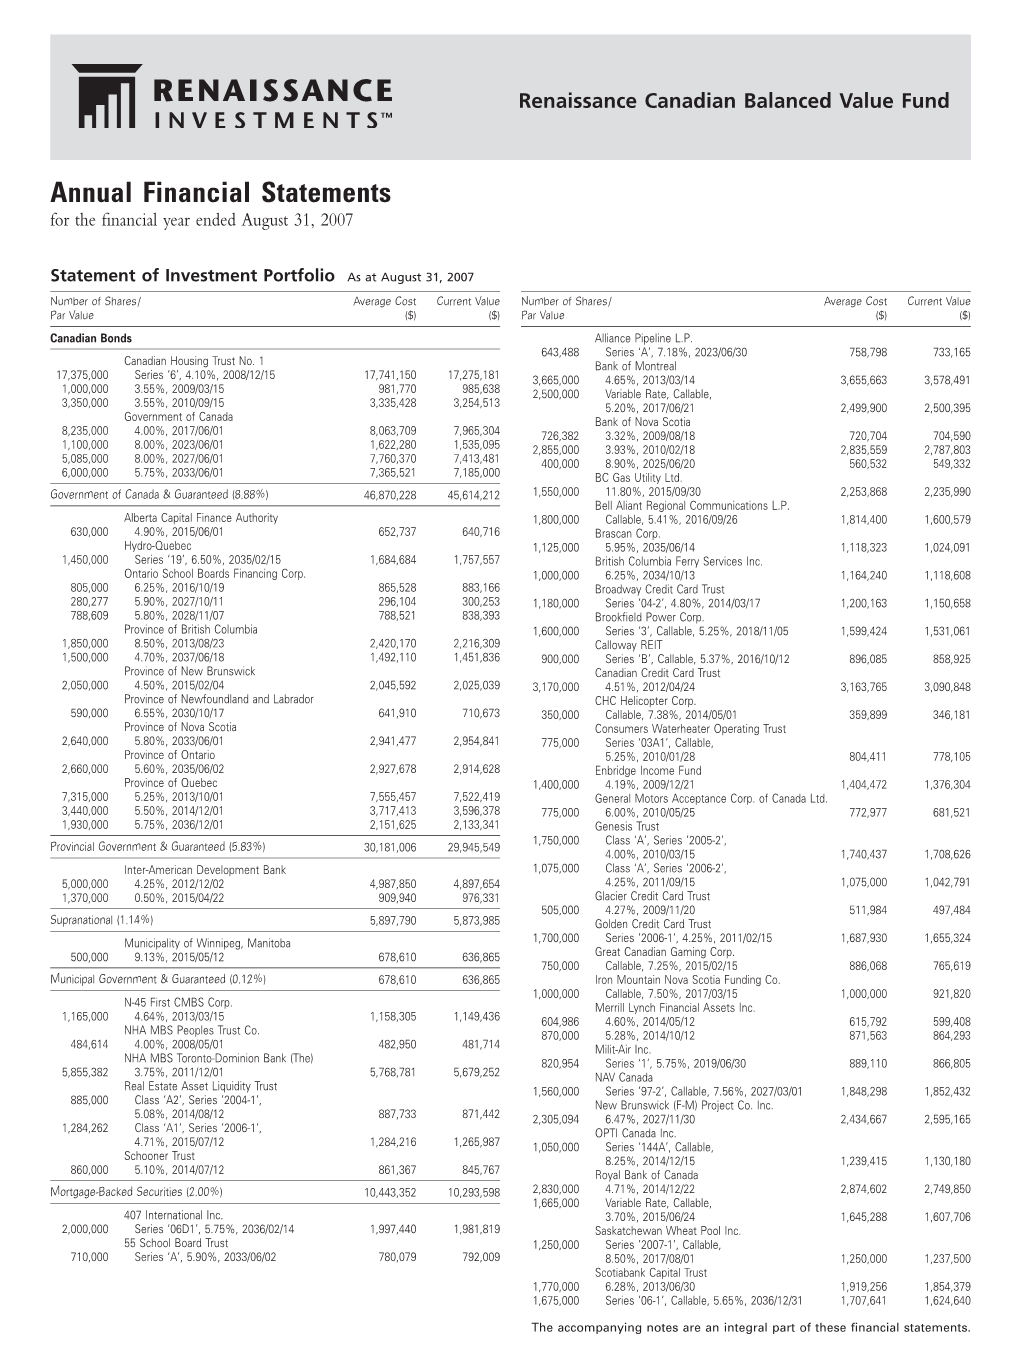 Annual Financial Statements for the ﬁnancial Year Ended August 31, 2007